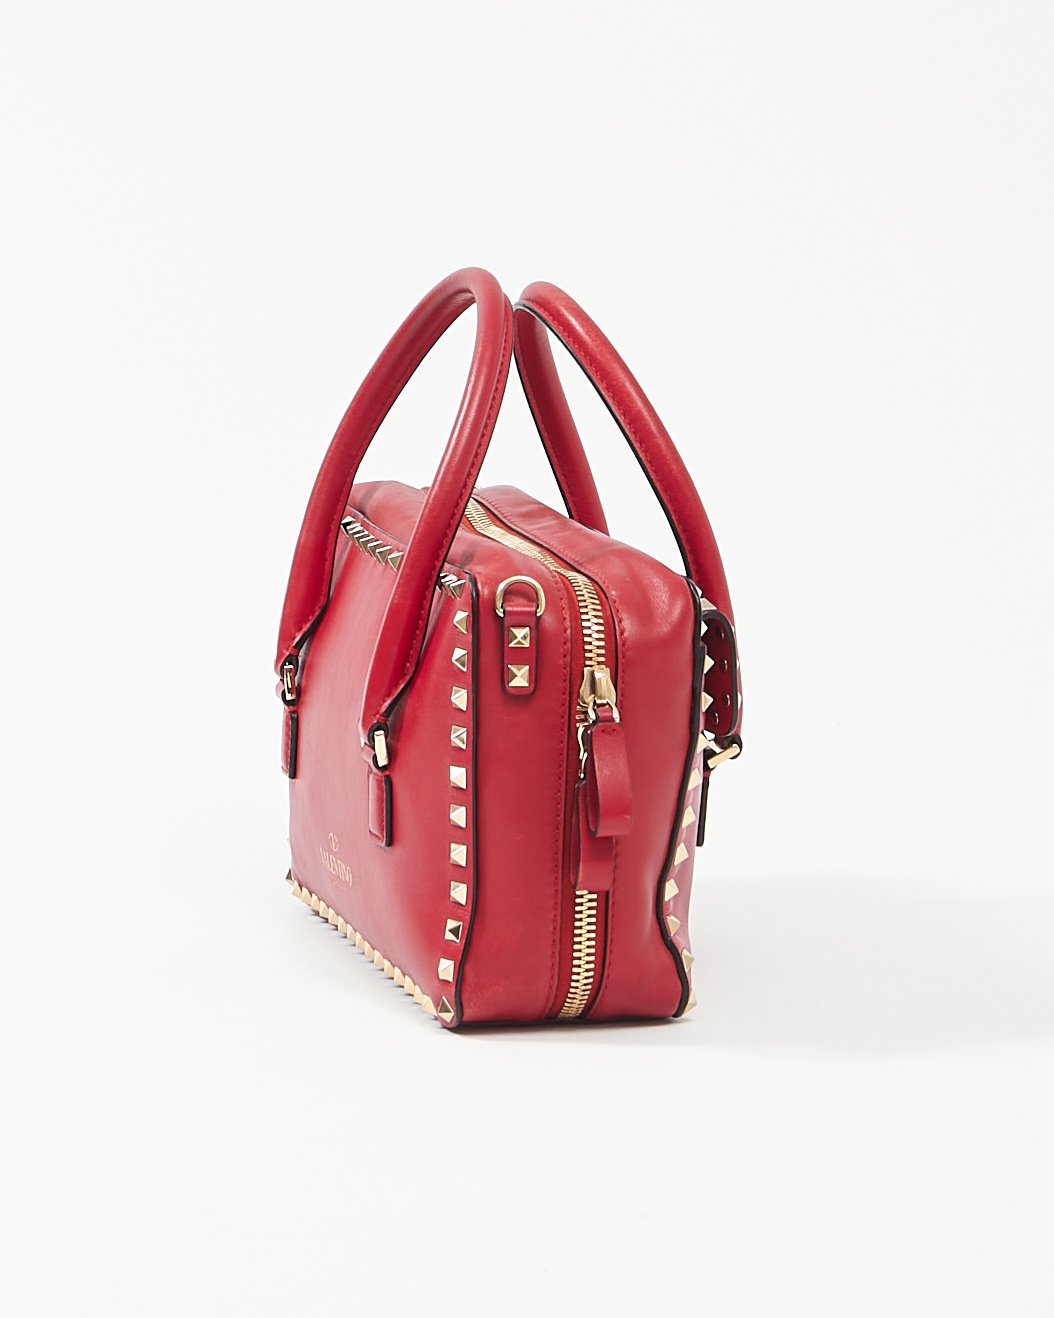 Valentino Red Leather Rockstud Top Handle Convertible Bag